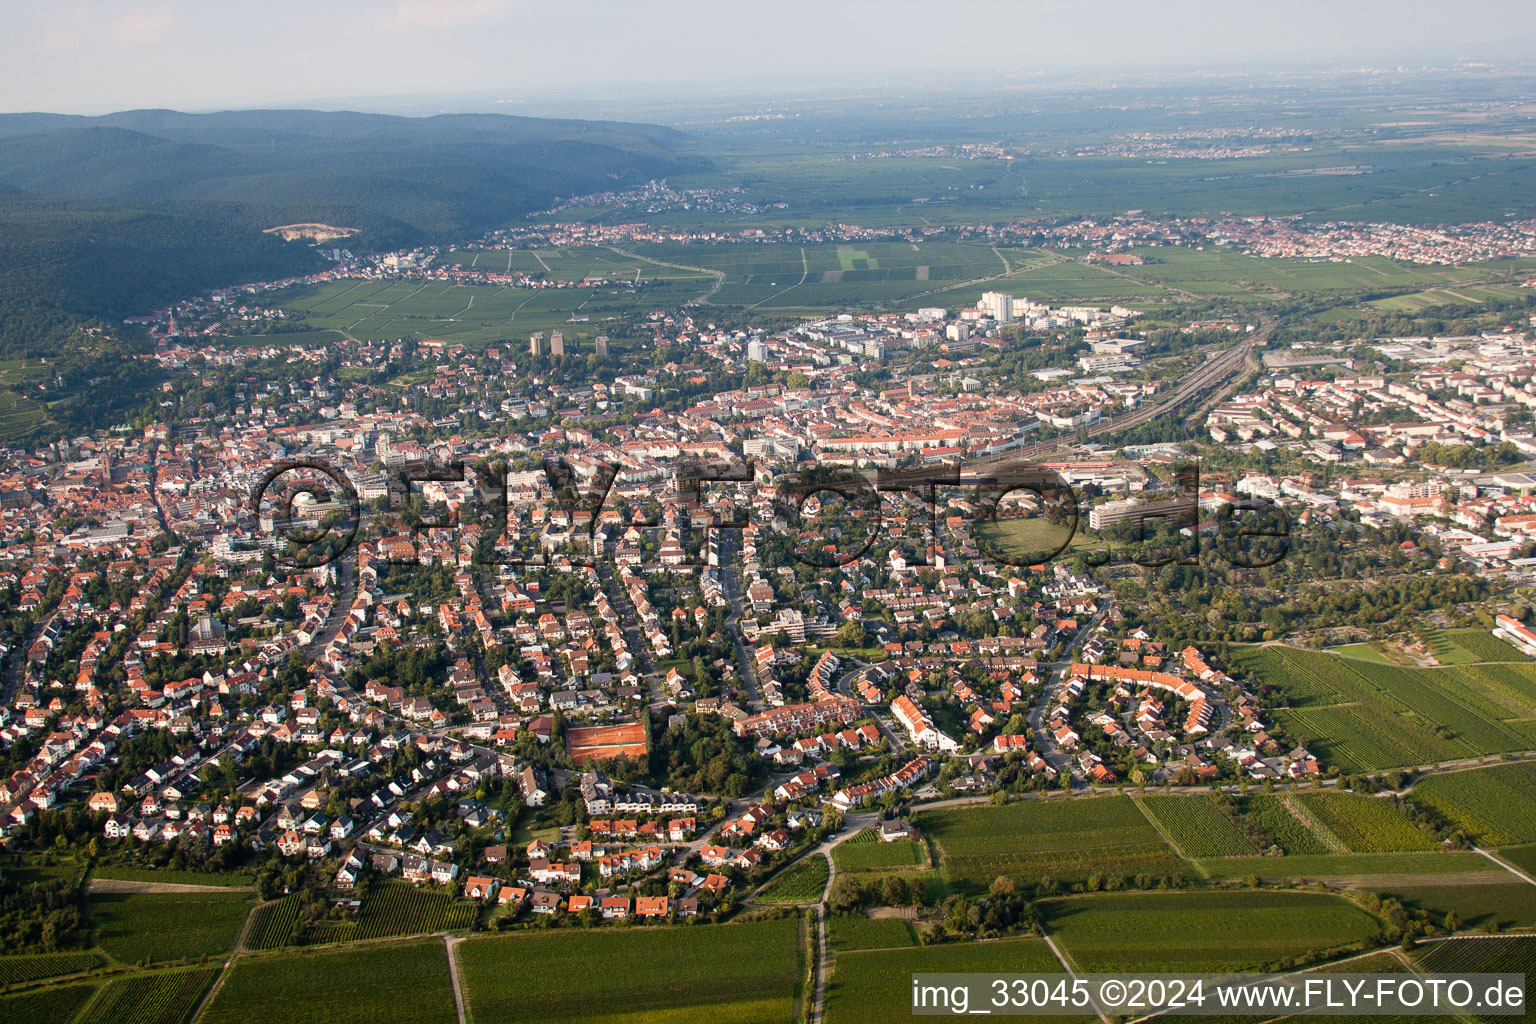 Aerial view of From the south in Neustadt an der Weinstraße in the state Rhineland-Palatinate, Germany